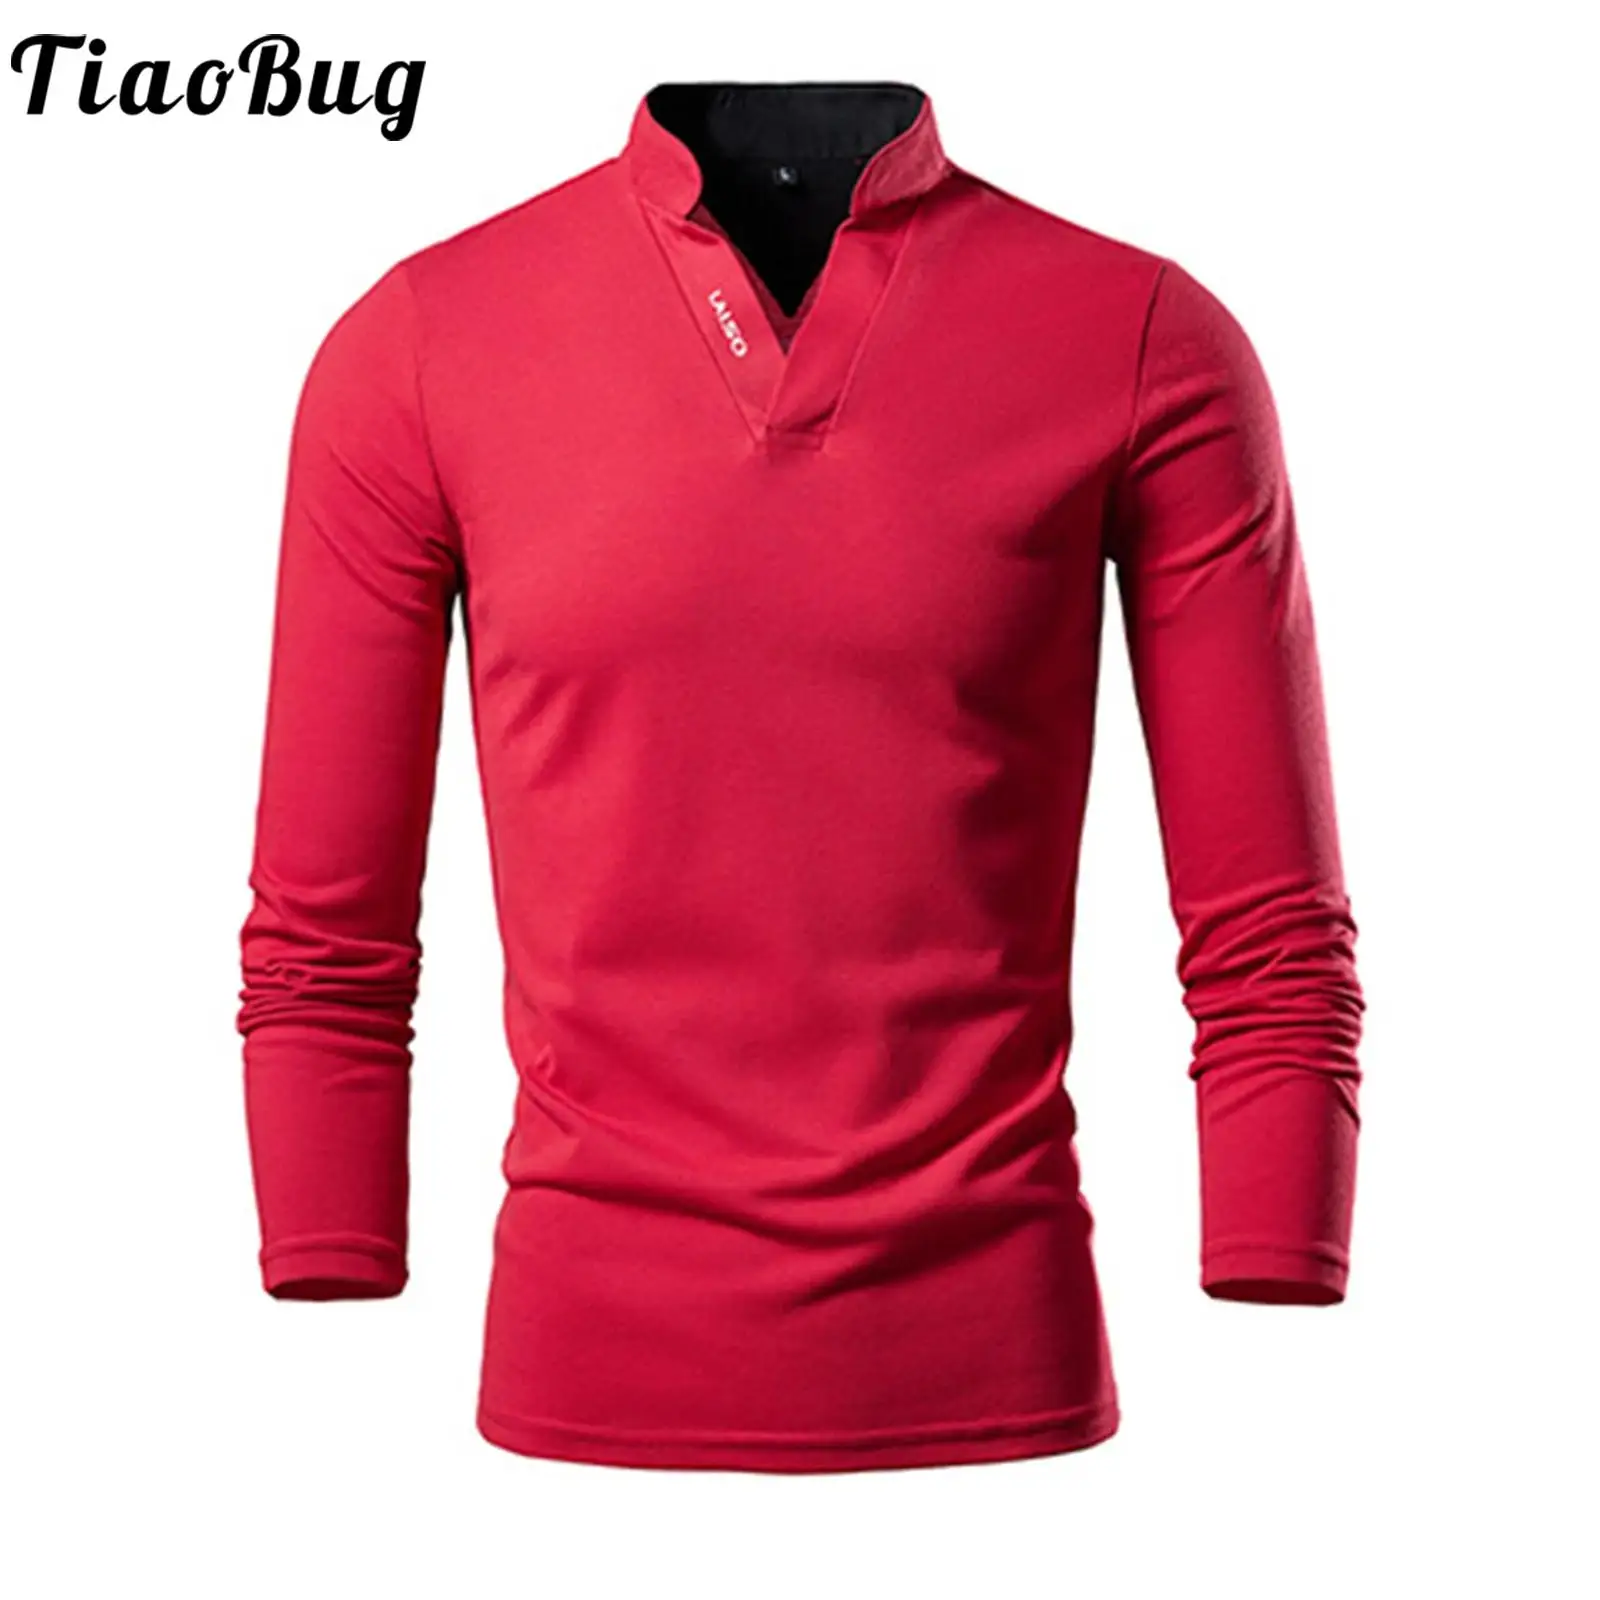 

Mens Fashion Contrast Color Stand Collar T-shirt Casual Long Sleeve Breathable Warm Tops for Office Business Golf Tennis Workout